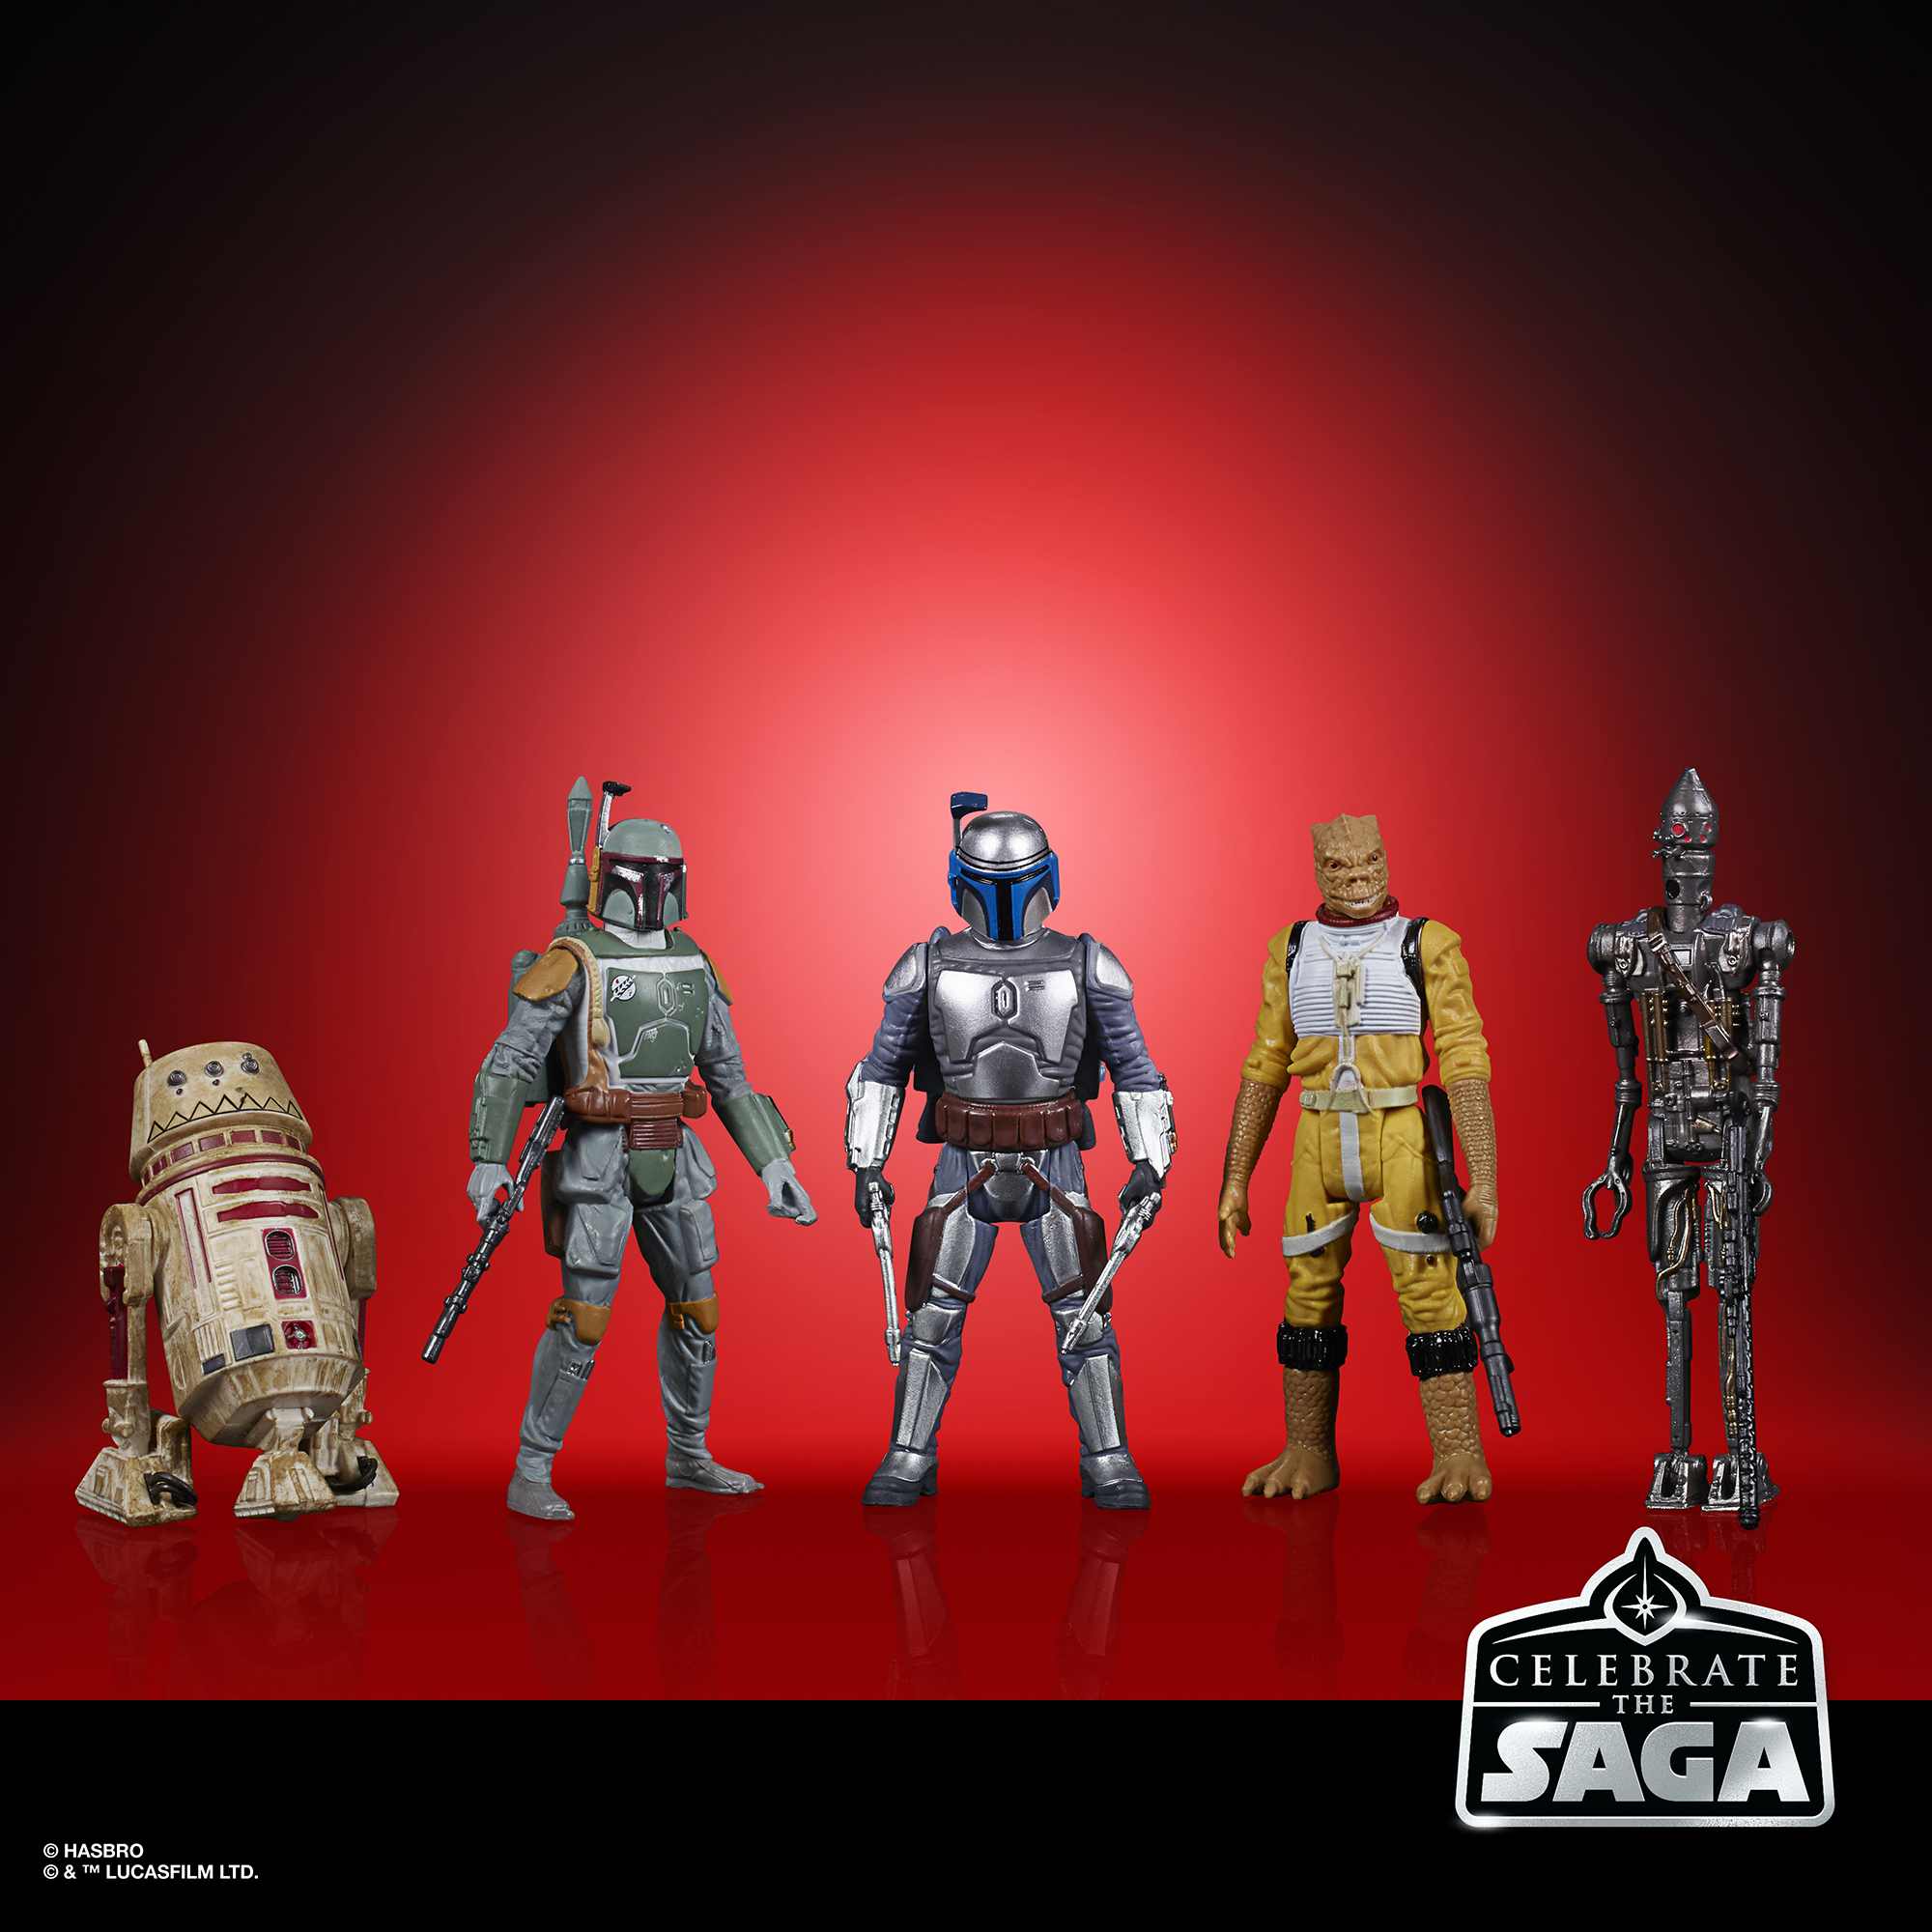 Star Wars Celebrate the Saga Toys Bounty Hunters Action Figure Set, Accessories - image 4 of 7